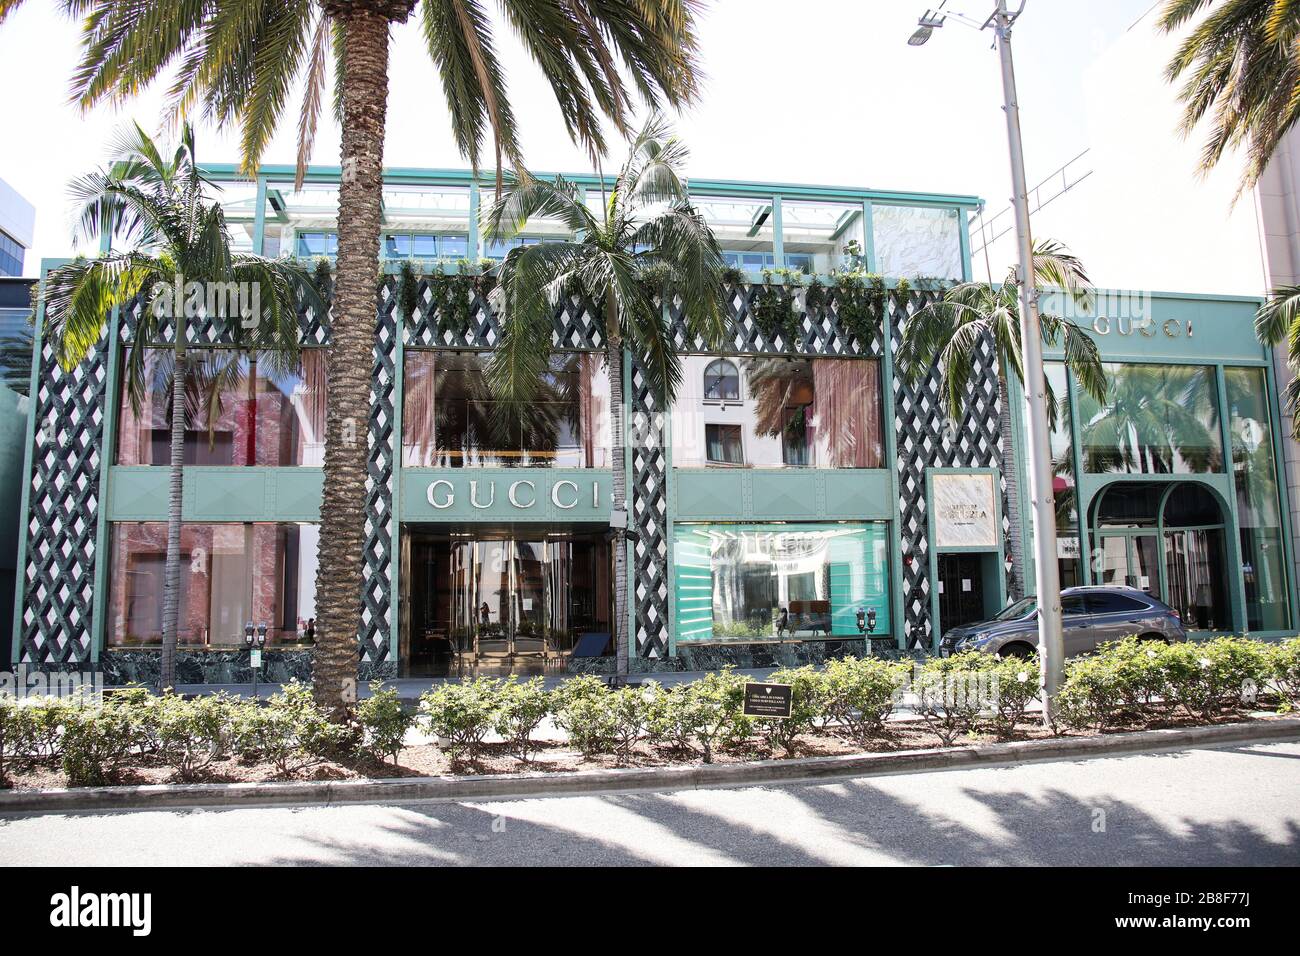 Gucci - The Gucci Store on Rodeo Drive in Beverly Hills